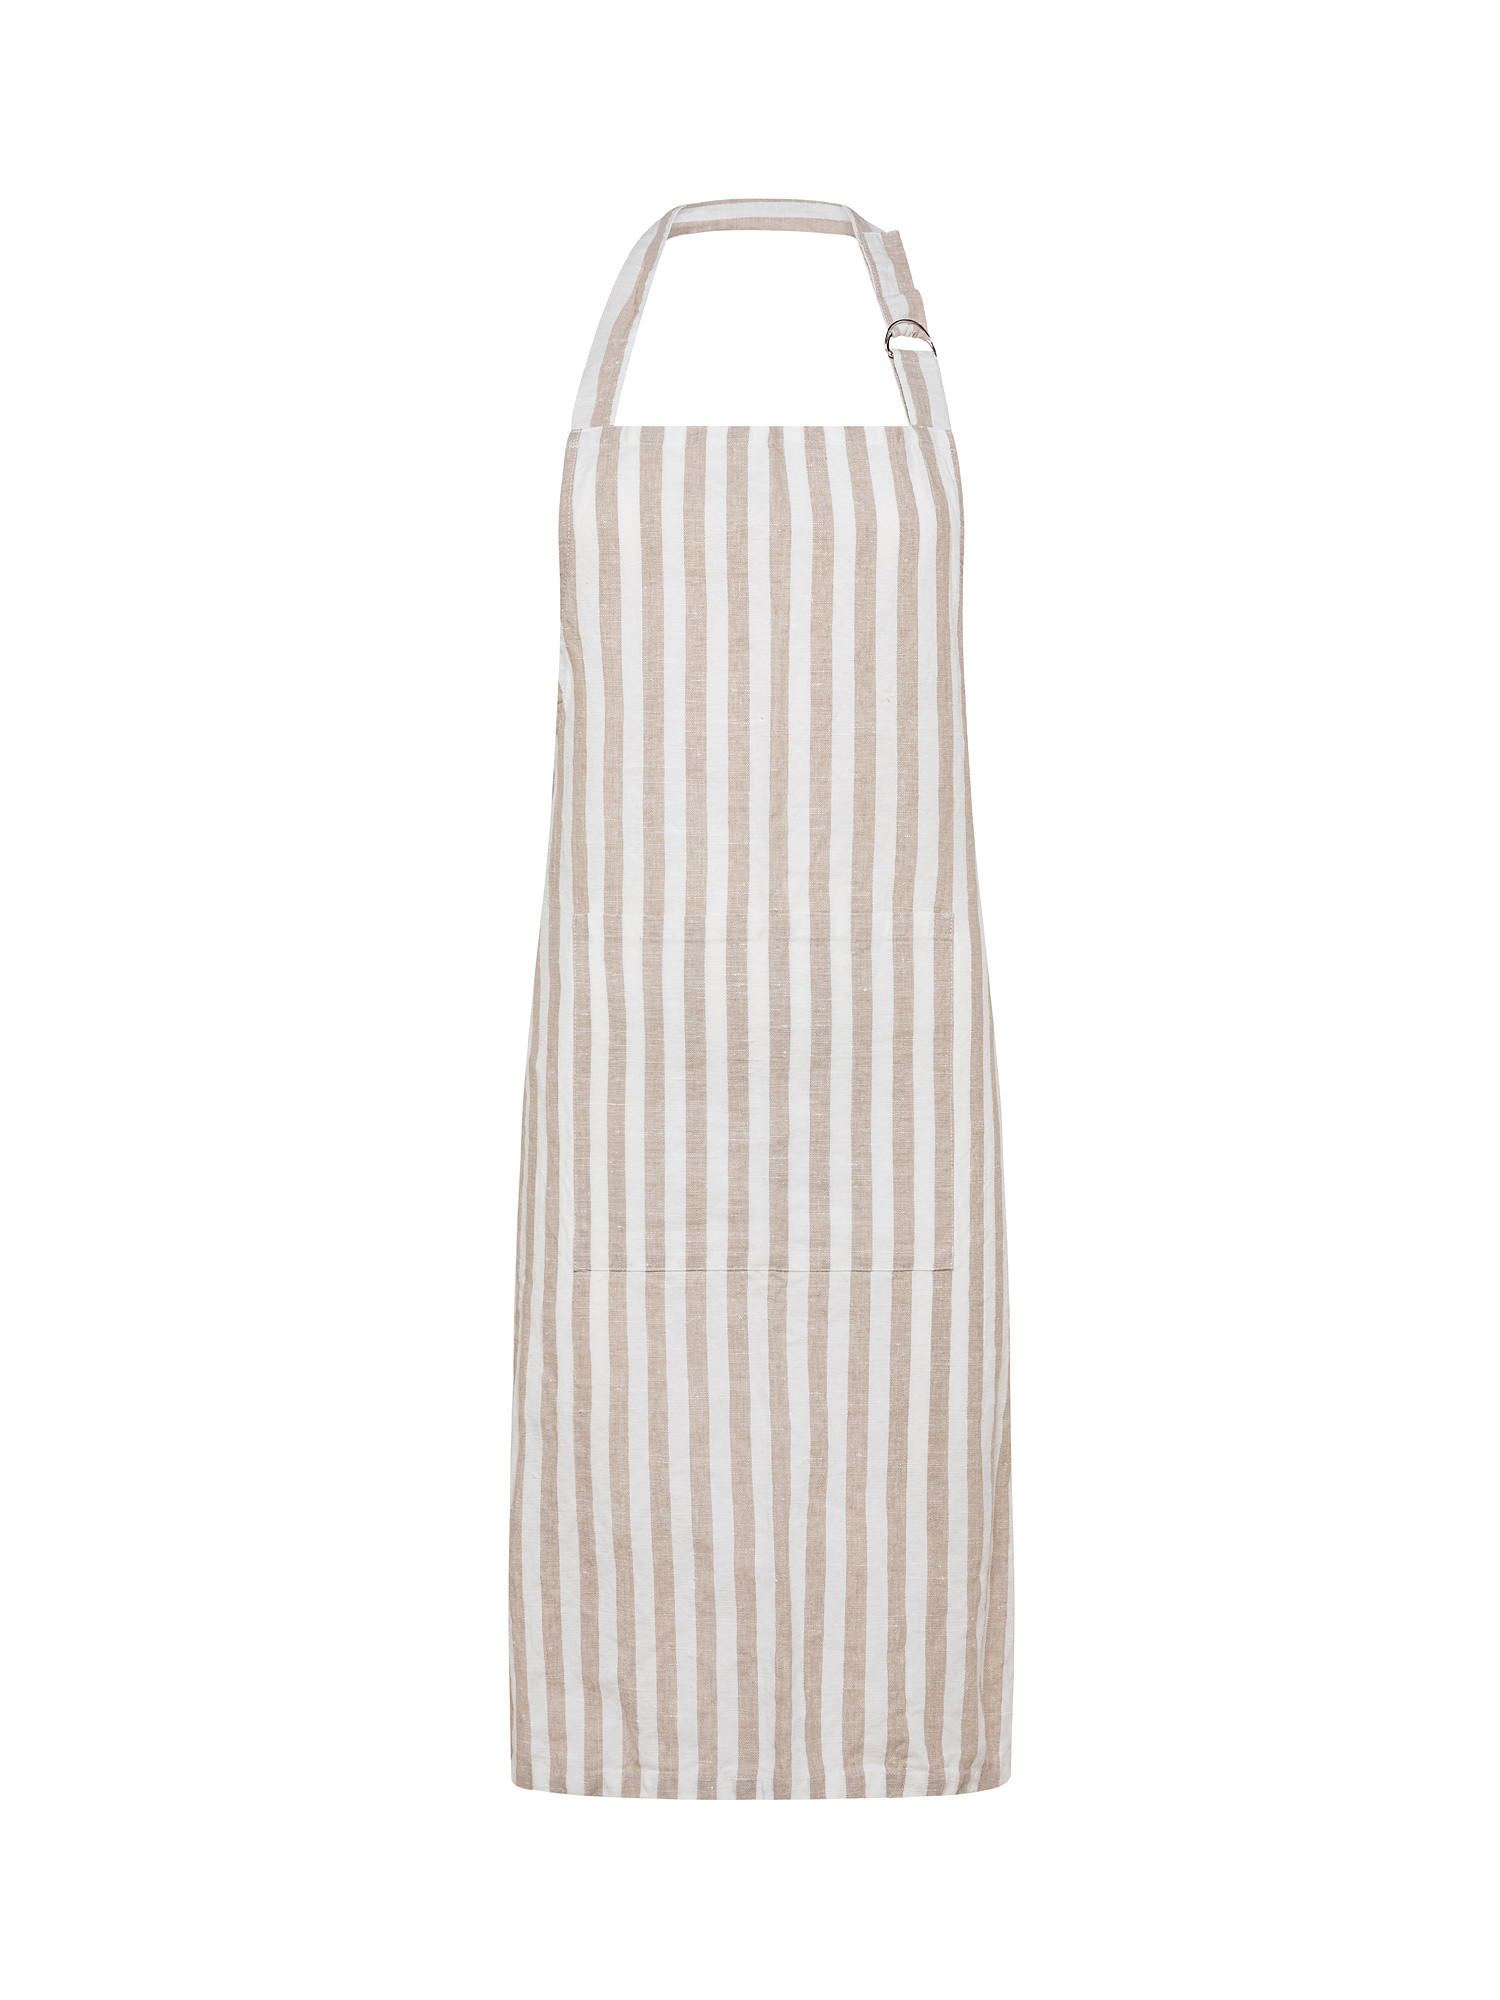 Linen and cotton striped kitchen apron, Beige, large image number 0